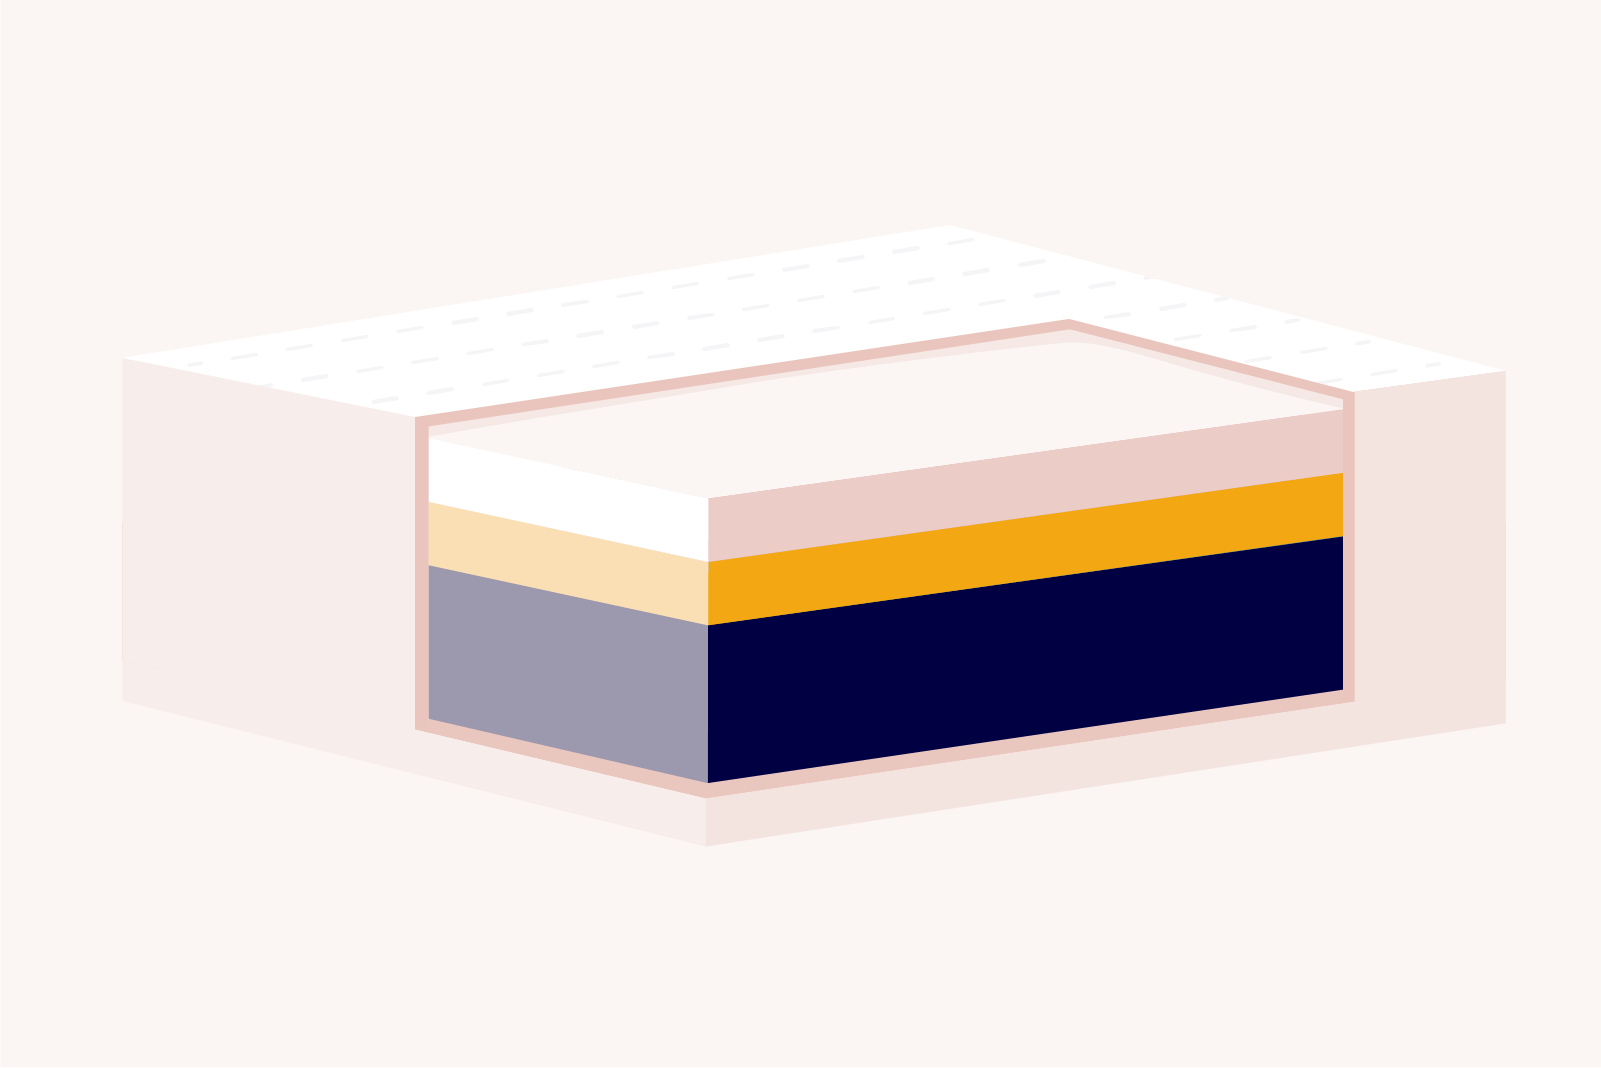 types of mattresses: hero image illustration showing the layers of a foam mattress